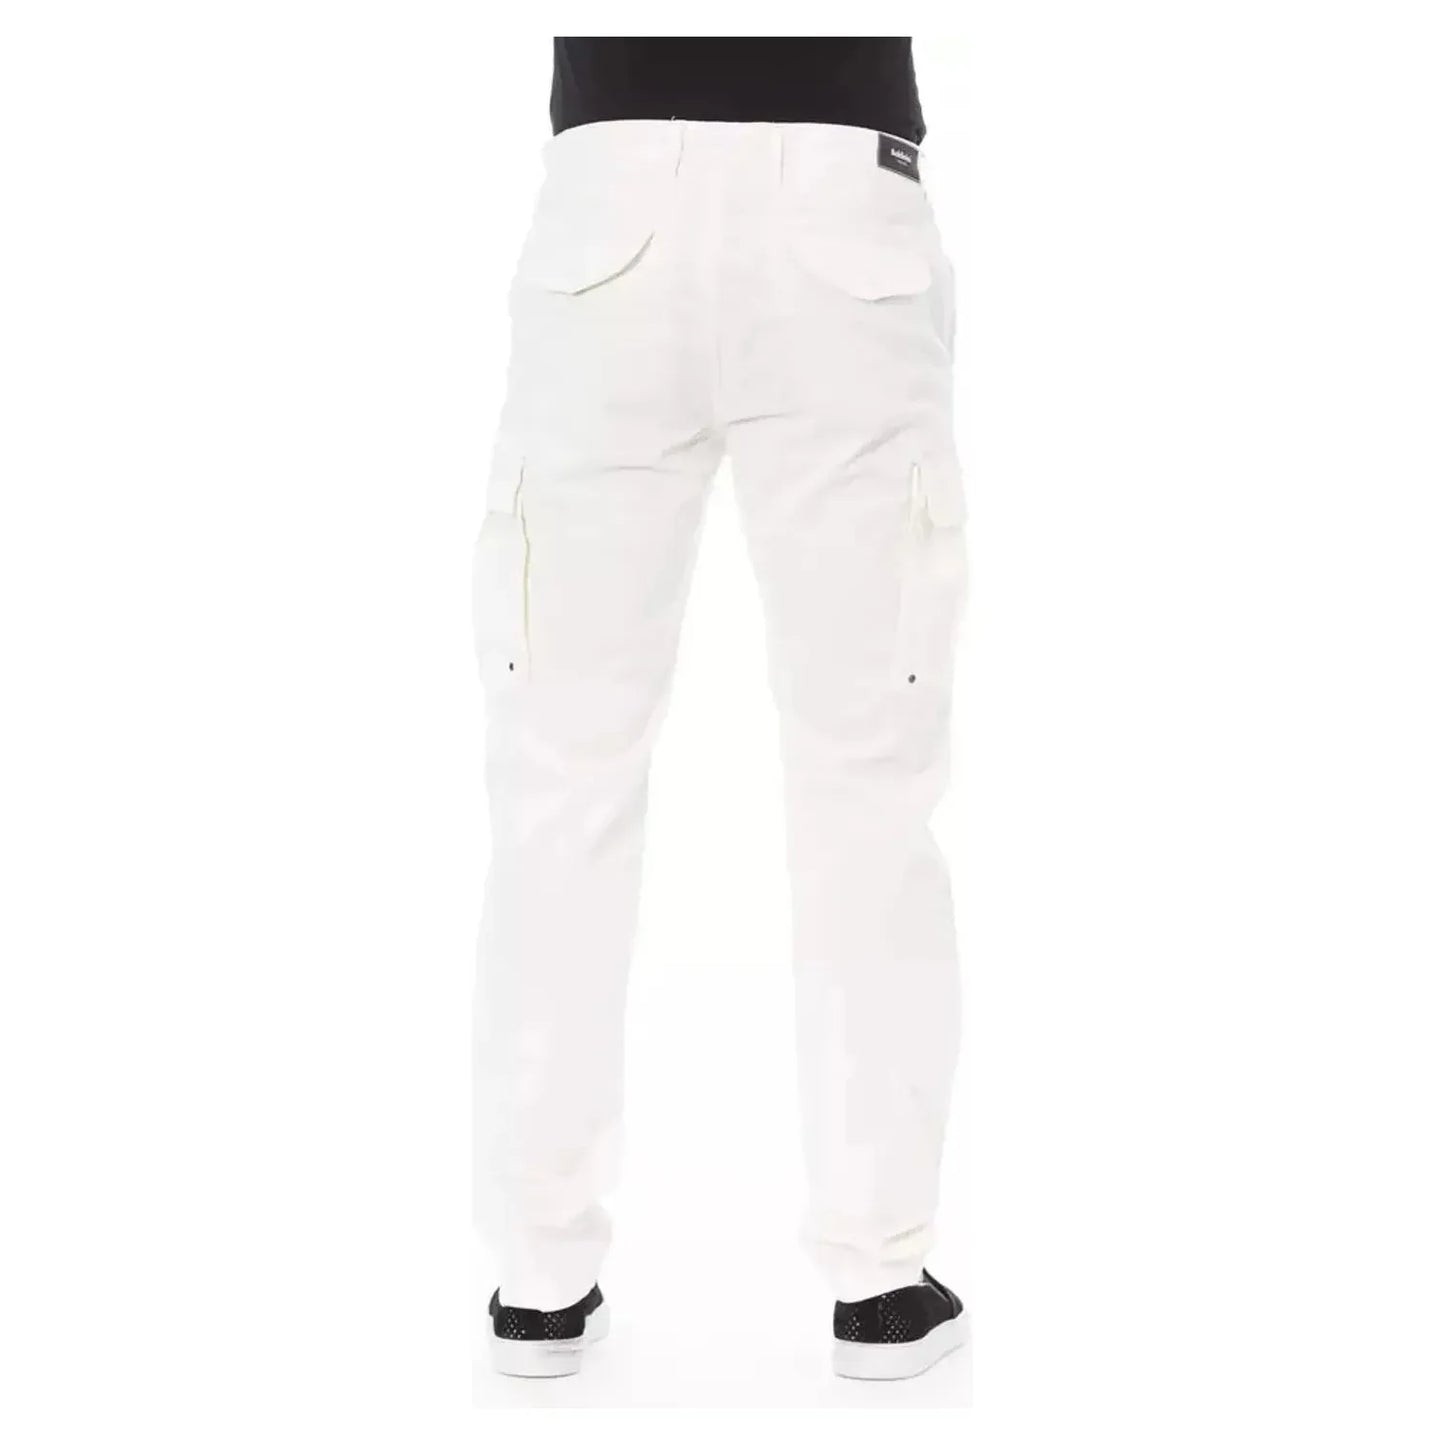 Baldinini Trend Chic White Cargo Trousers - Tailored Fit & Stretch white-cotton-jeans-pant-12